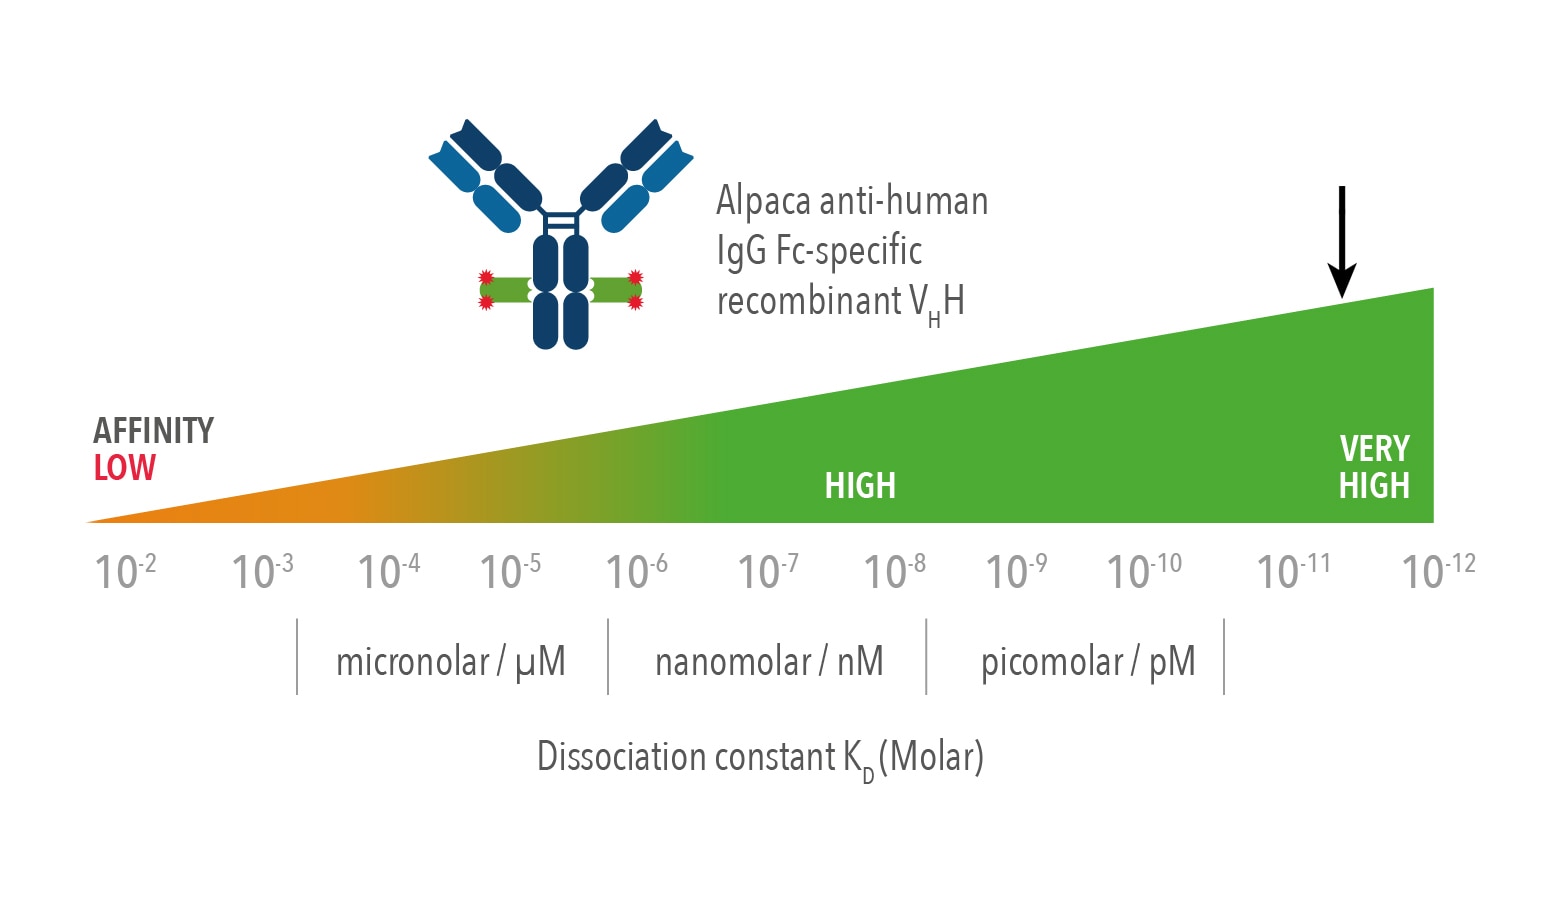 The alpaca anti-human IgG Fc-specific recombinant VHH [CTK0117] has a very high affinity (KD <10 pM) for human IgG primary antibody.